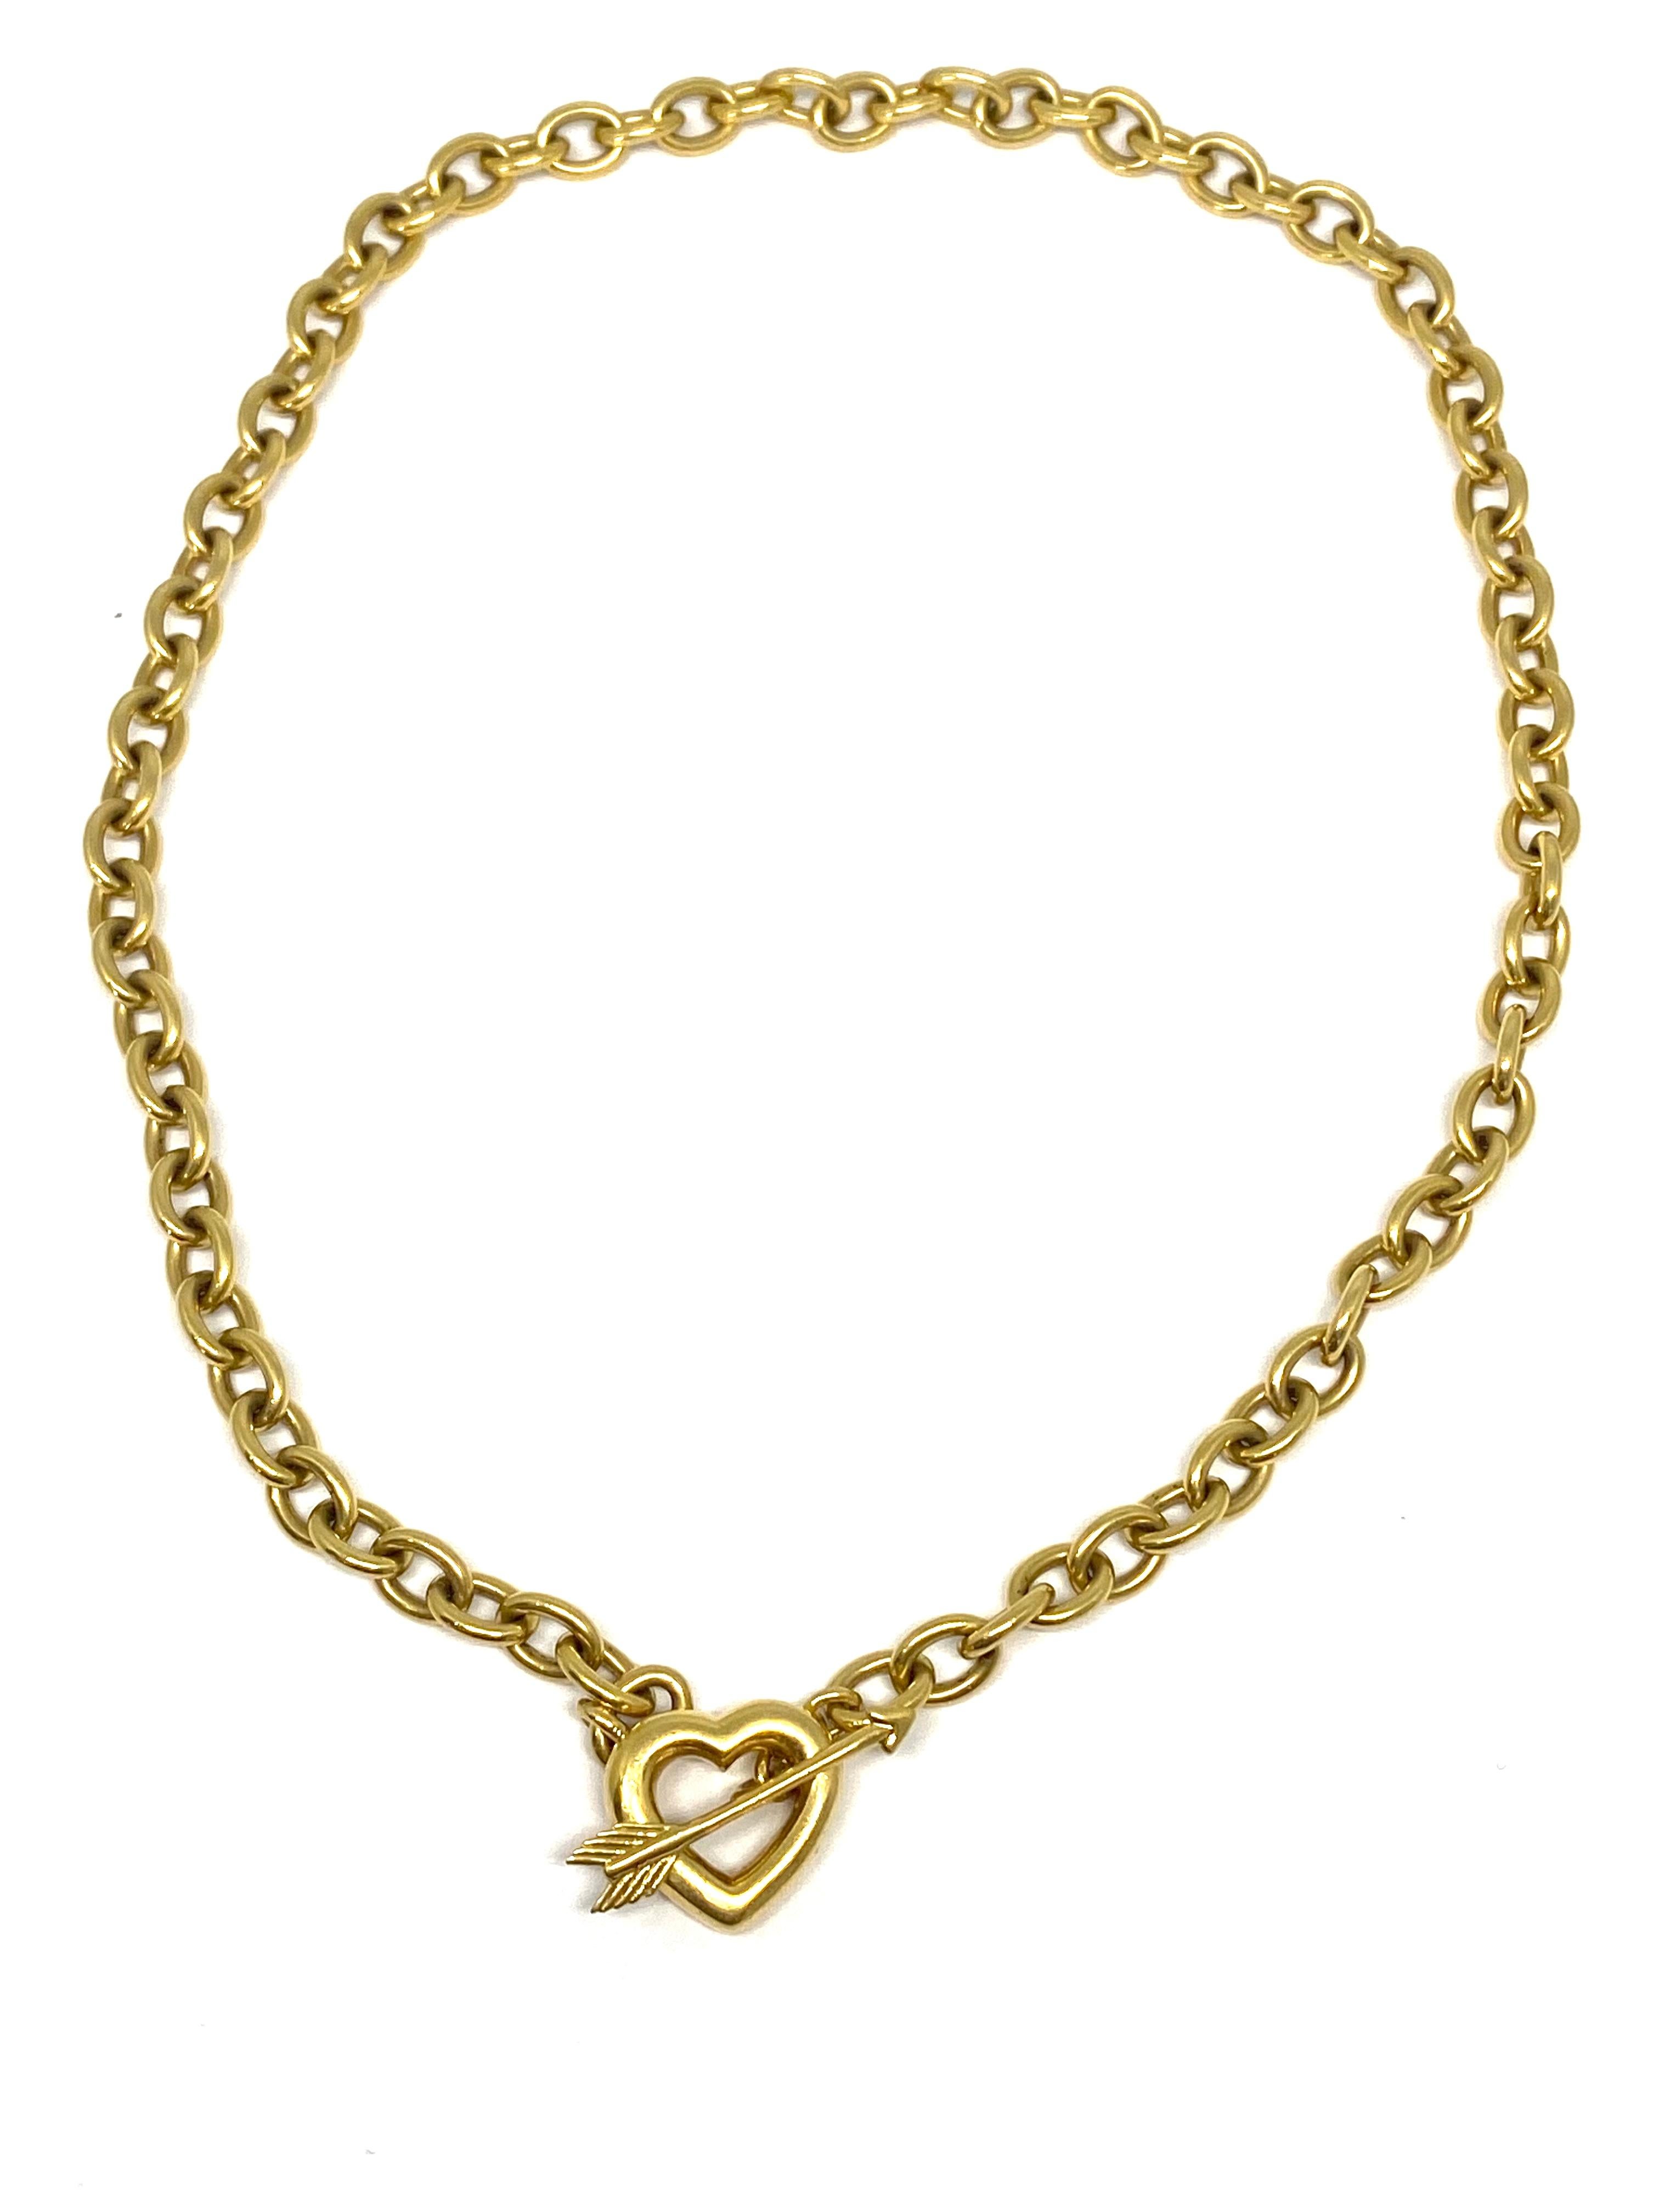 Product details:
Circa 1994.
Featuring oval shaped cable link chain necklace with heart and error toggle clasp in 18K yellow gold finish.
Signed Tiffany & Co., stamped 750 and 1994.
The heart measures 5/8